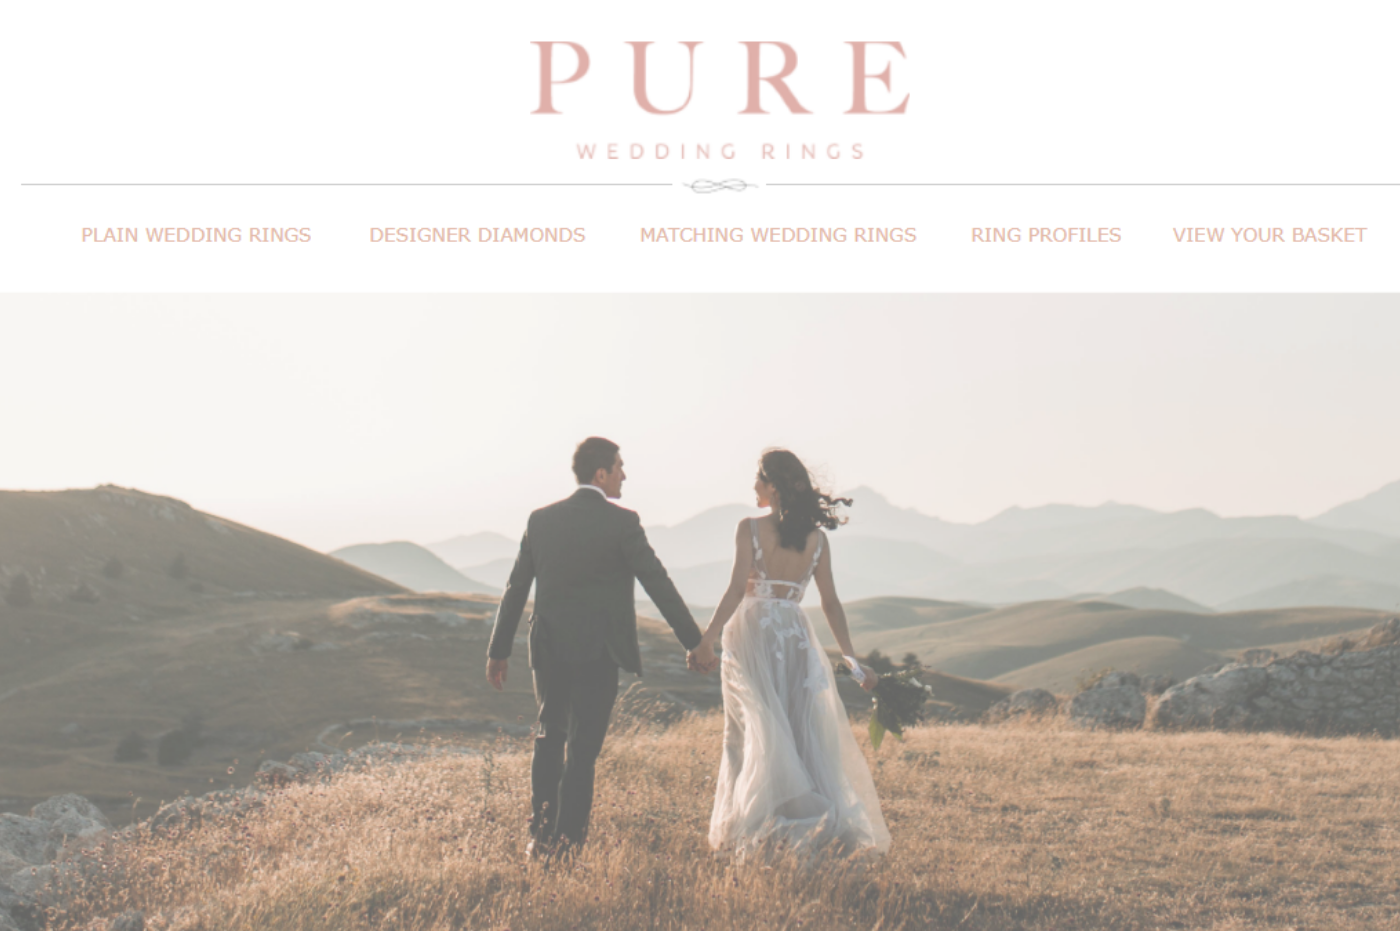 Hockley Mint revamps Pure Wedding Rings brand with new sample box and customer-facing website